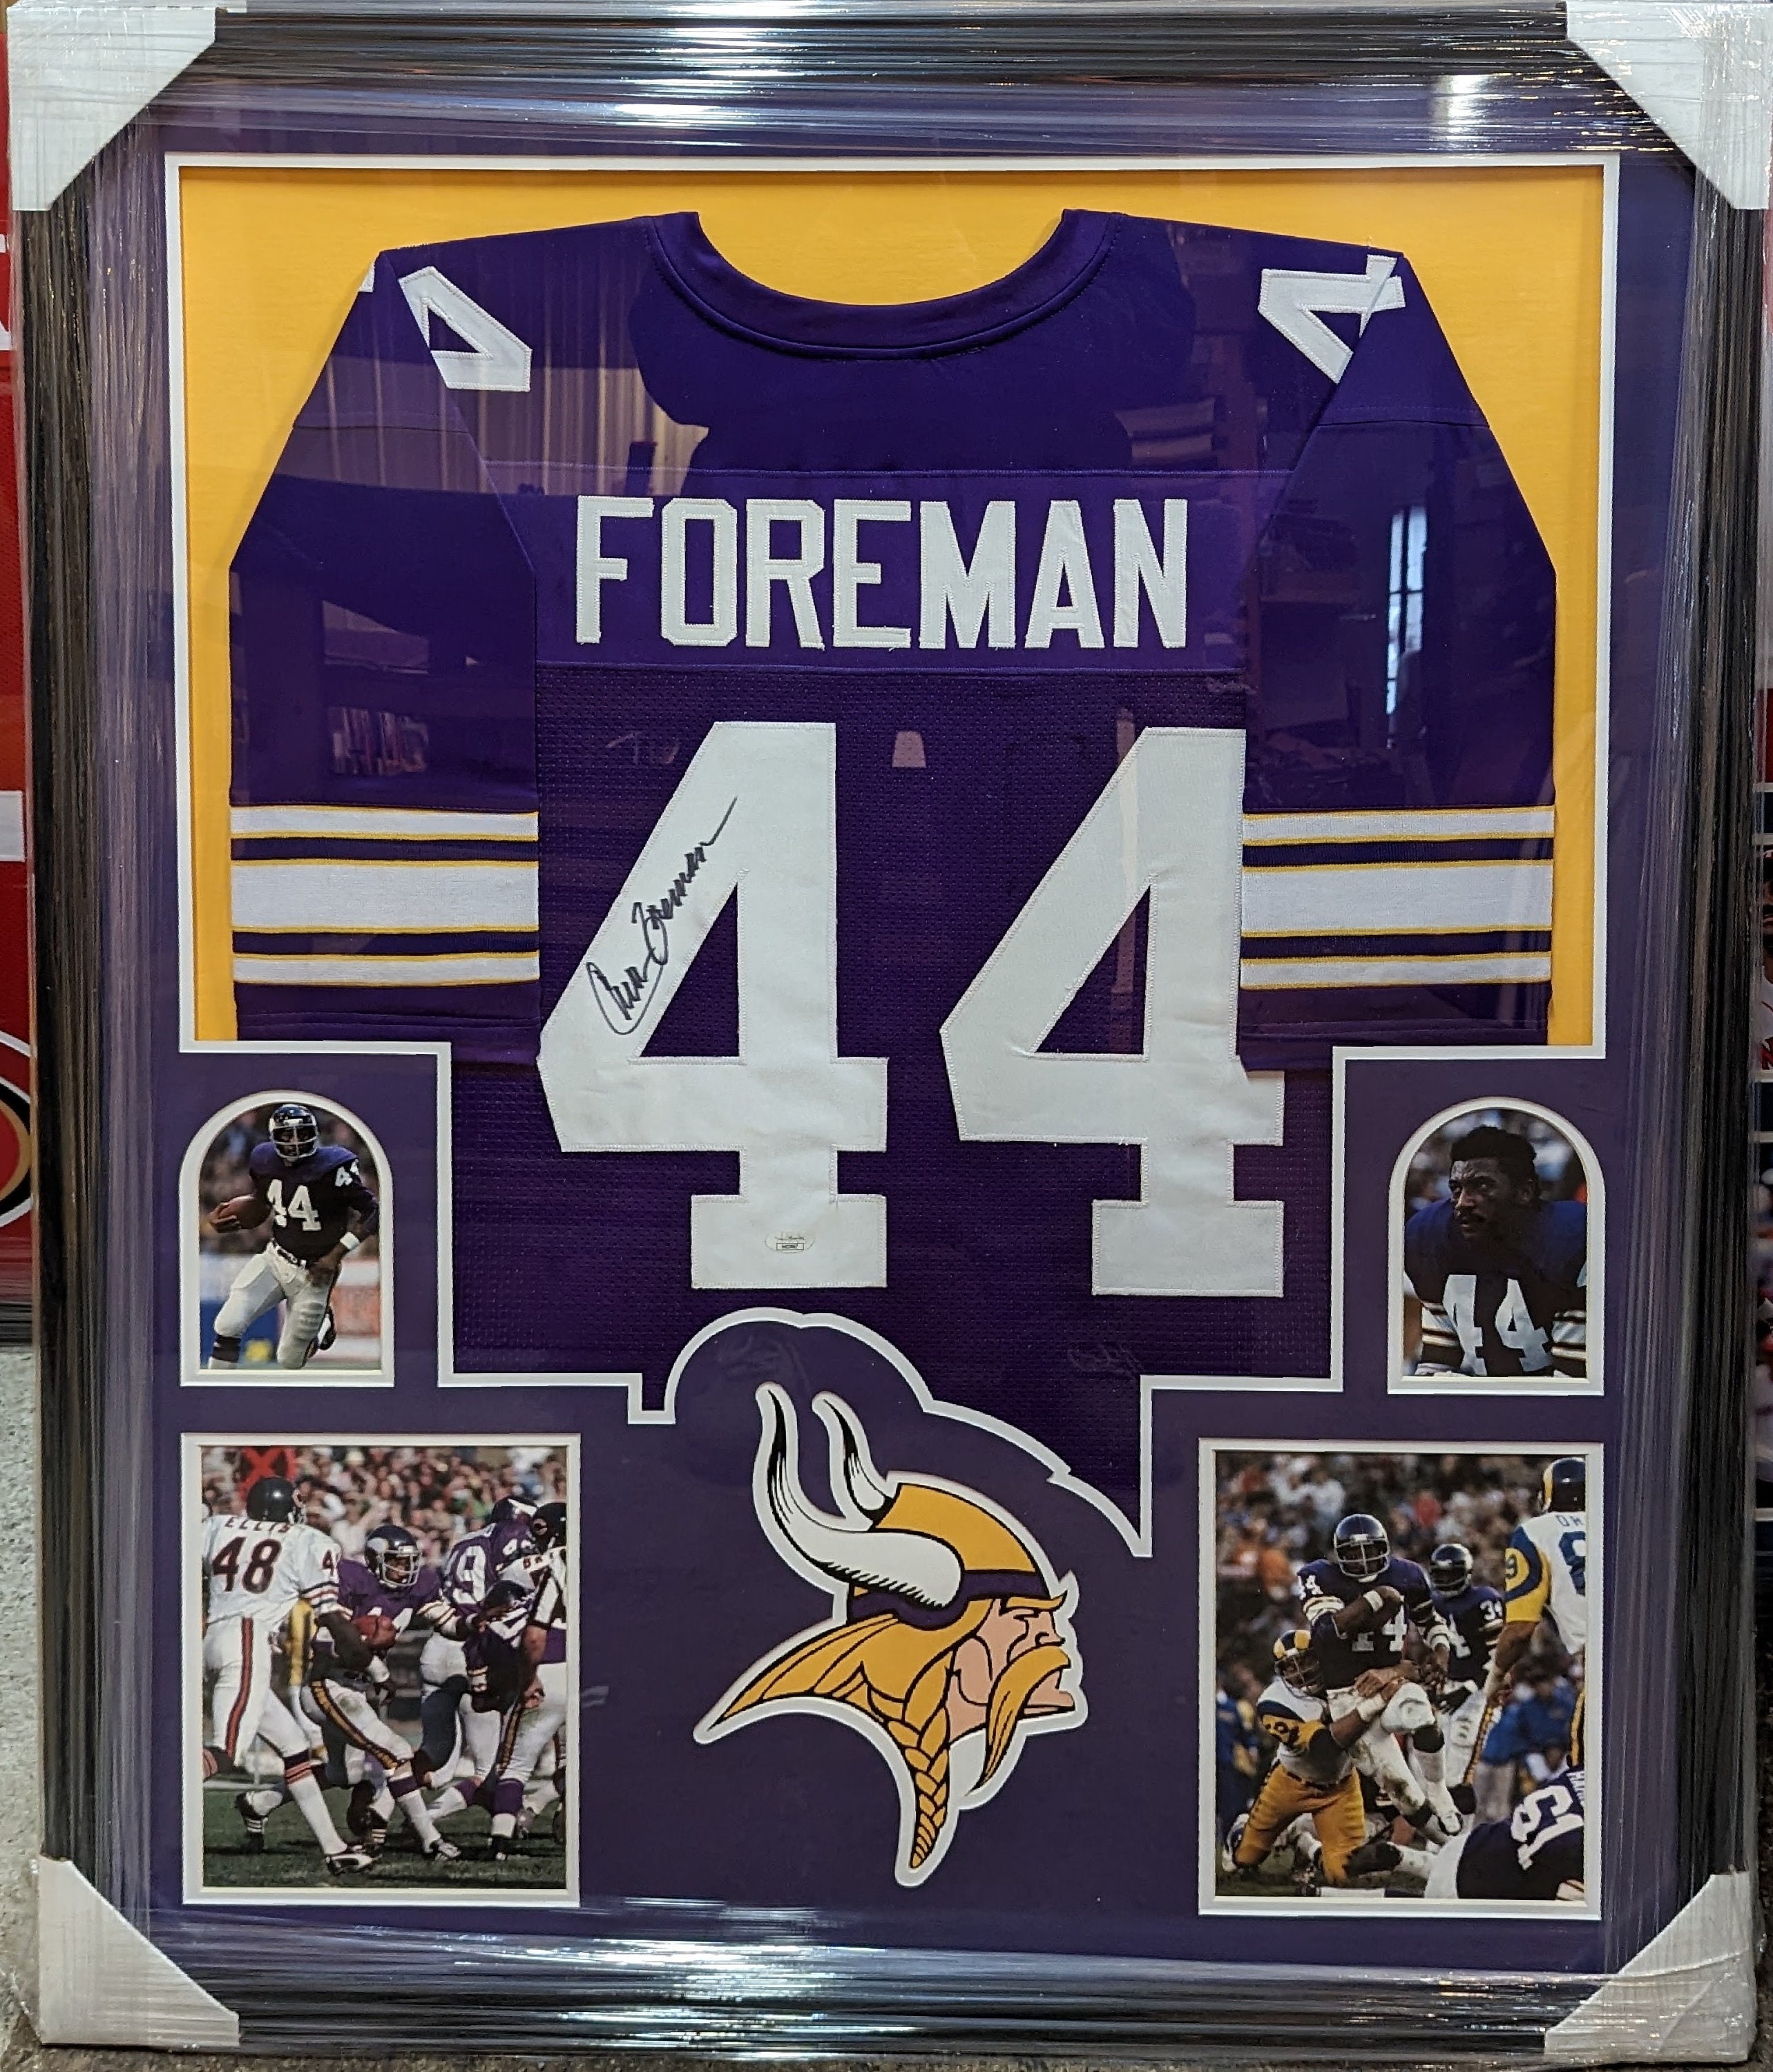 chuck foreman jersey for sale